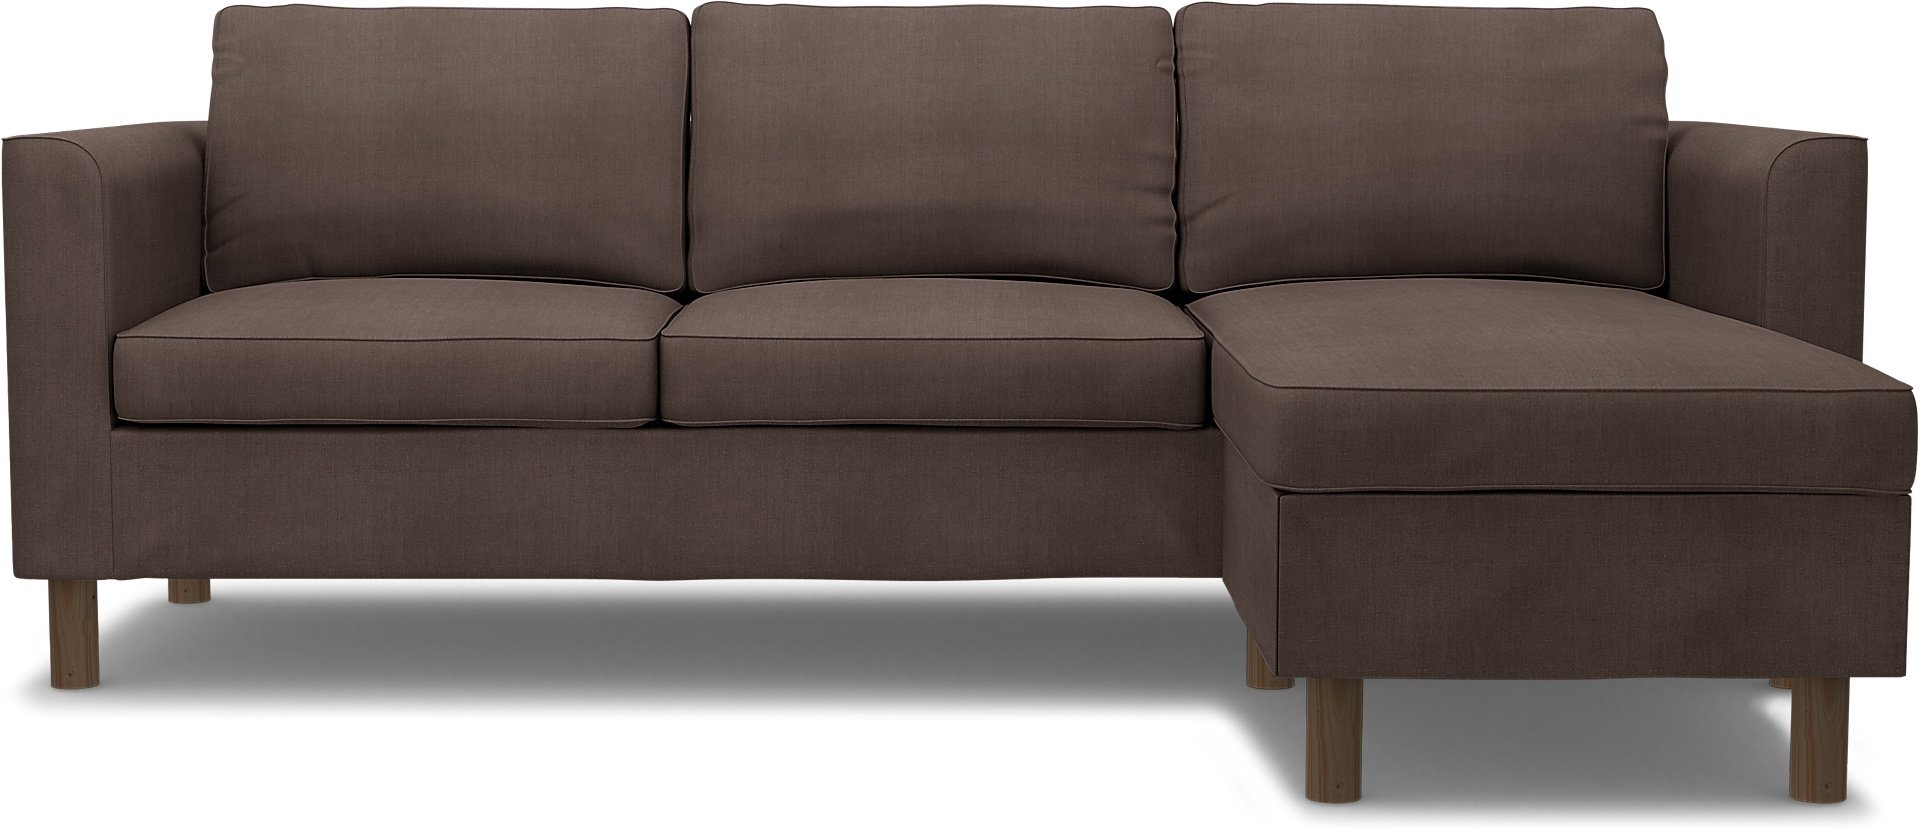 IKEA - Parup 3 Seater with chaise longue, Cocoa, Linen - Bemz